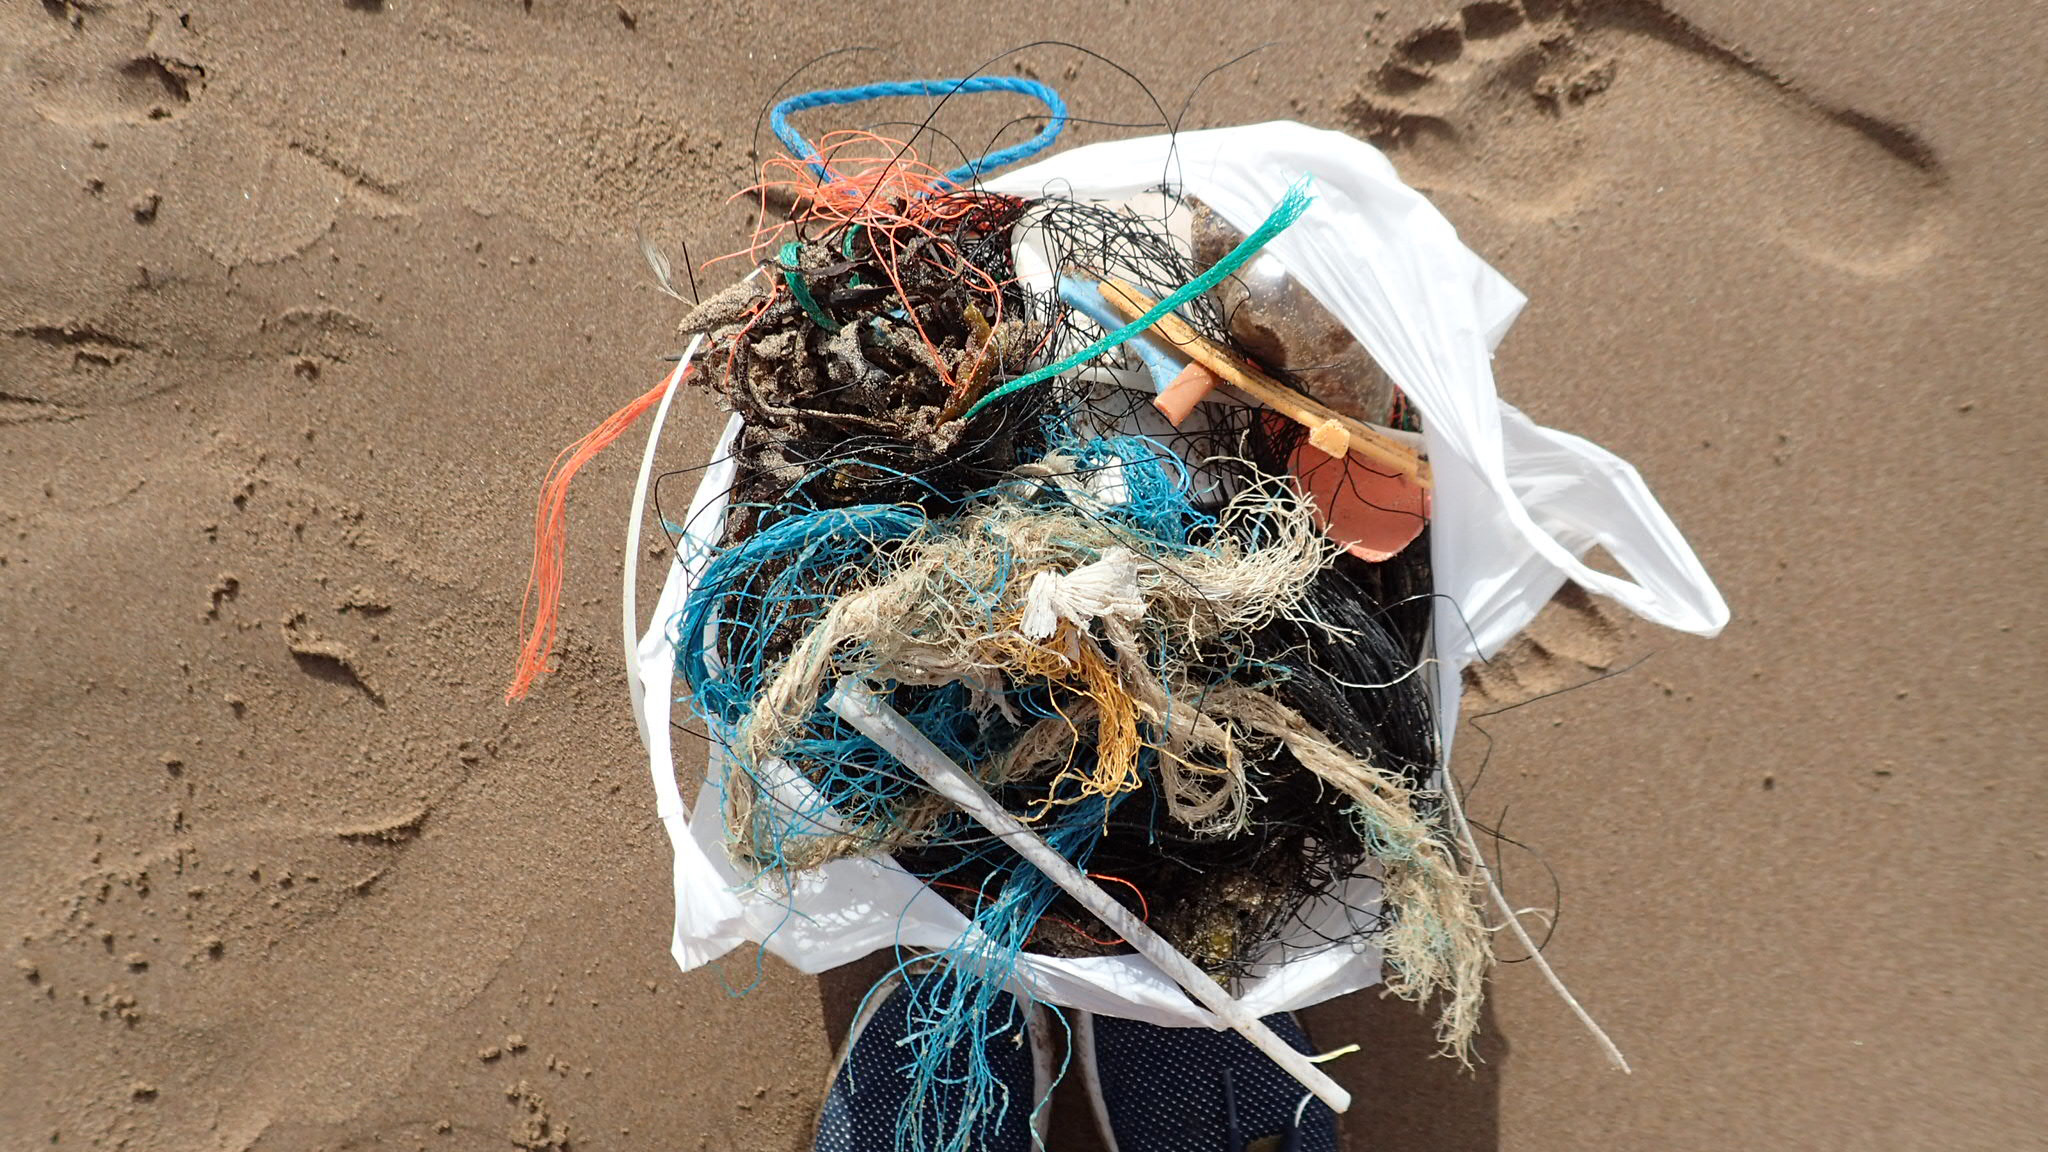 Sam certainly picked up the most plastic on this beach clean